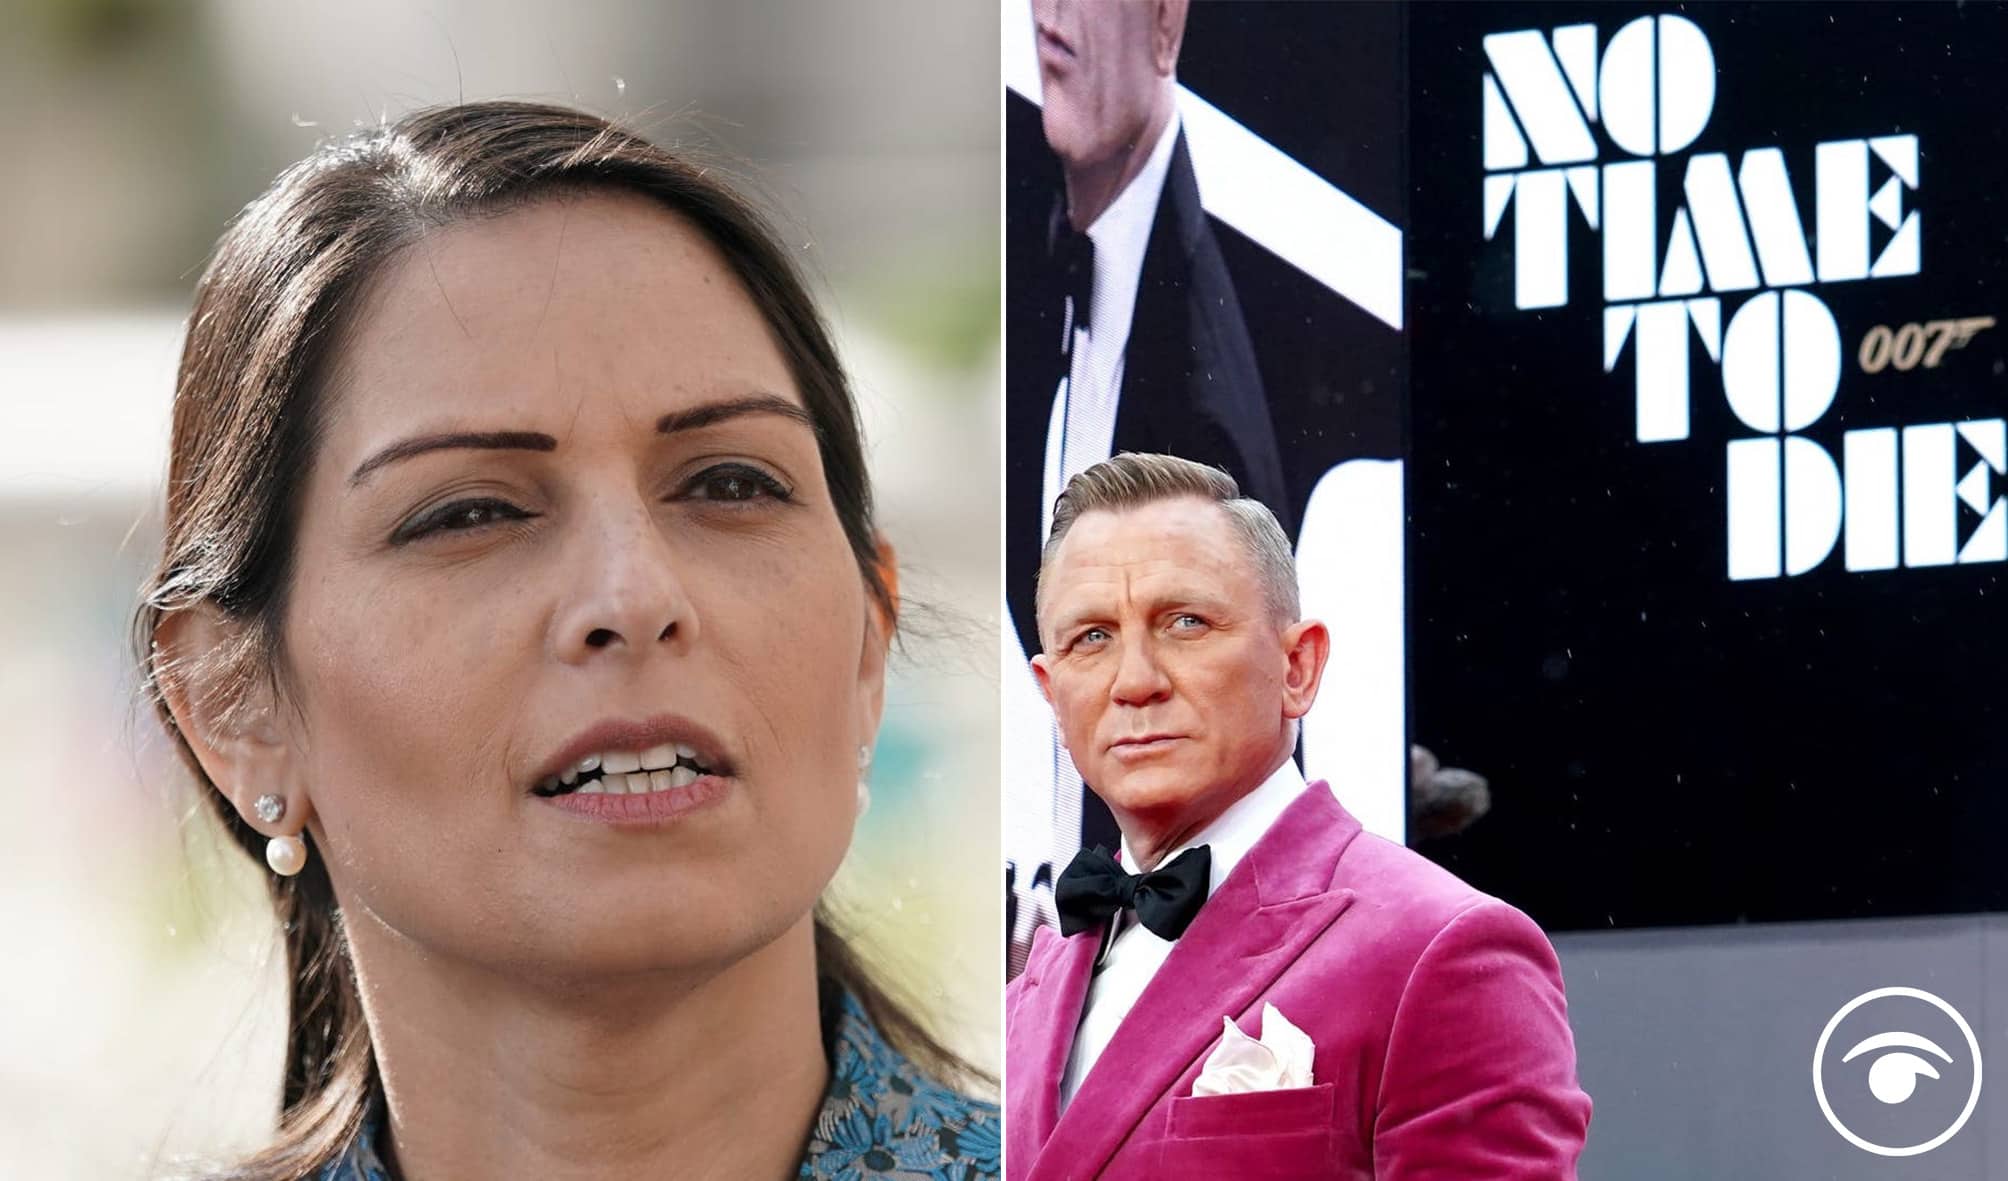 No time to lie? Patel attended Bond premier because movie is ‘connected to her job’